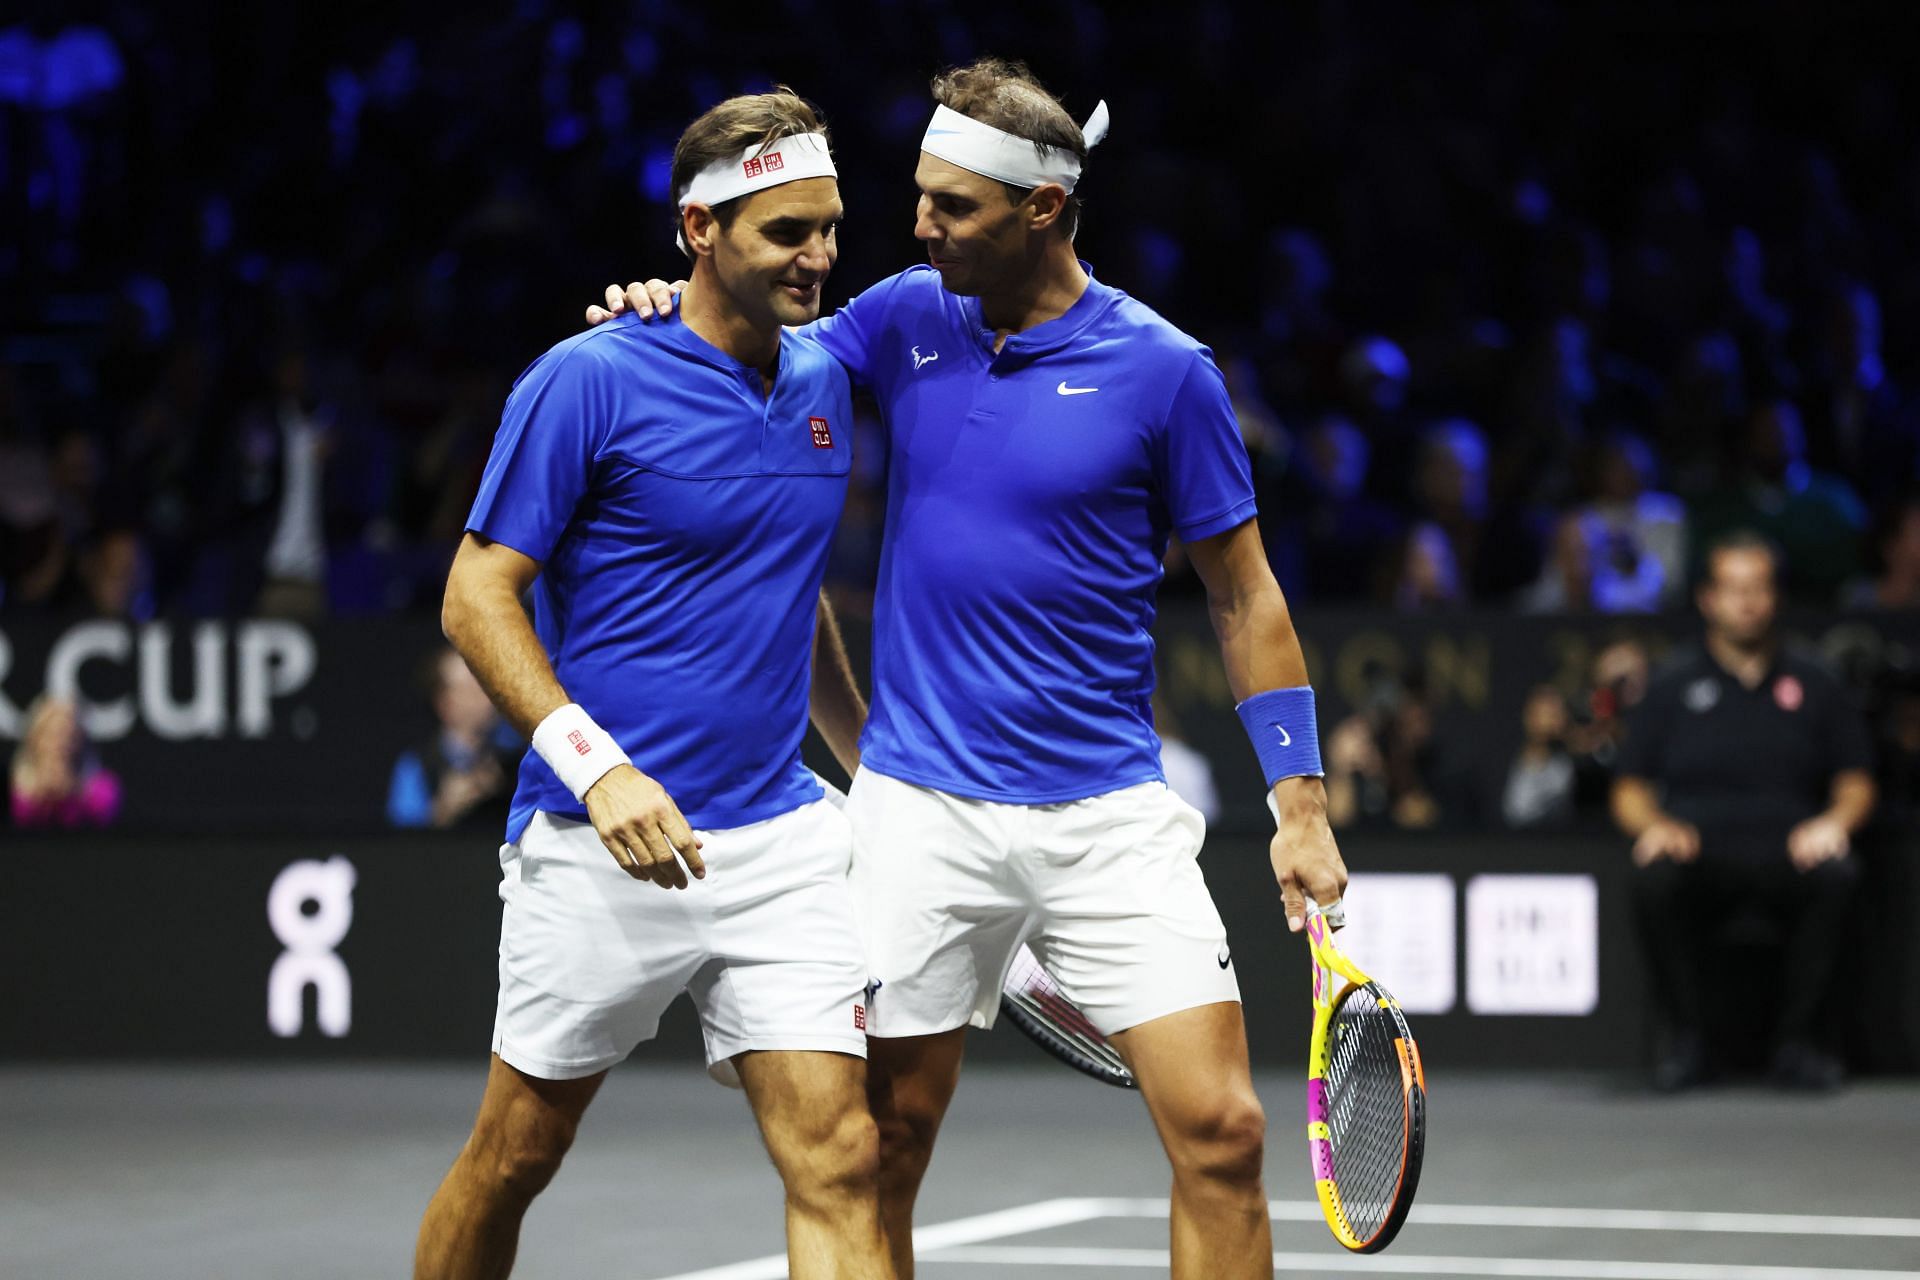 Roger Federer and Rafael Nadal (R) at the Laver Cup 2022 - Day One